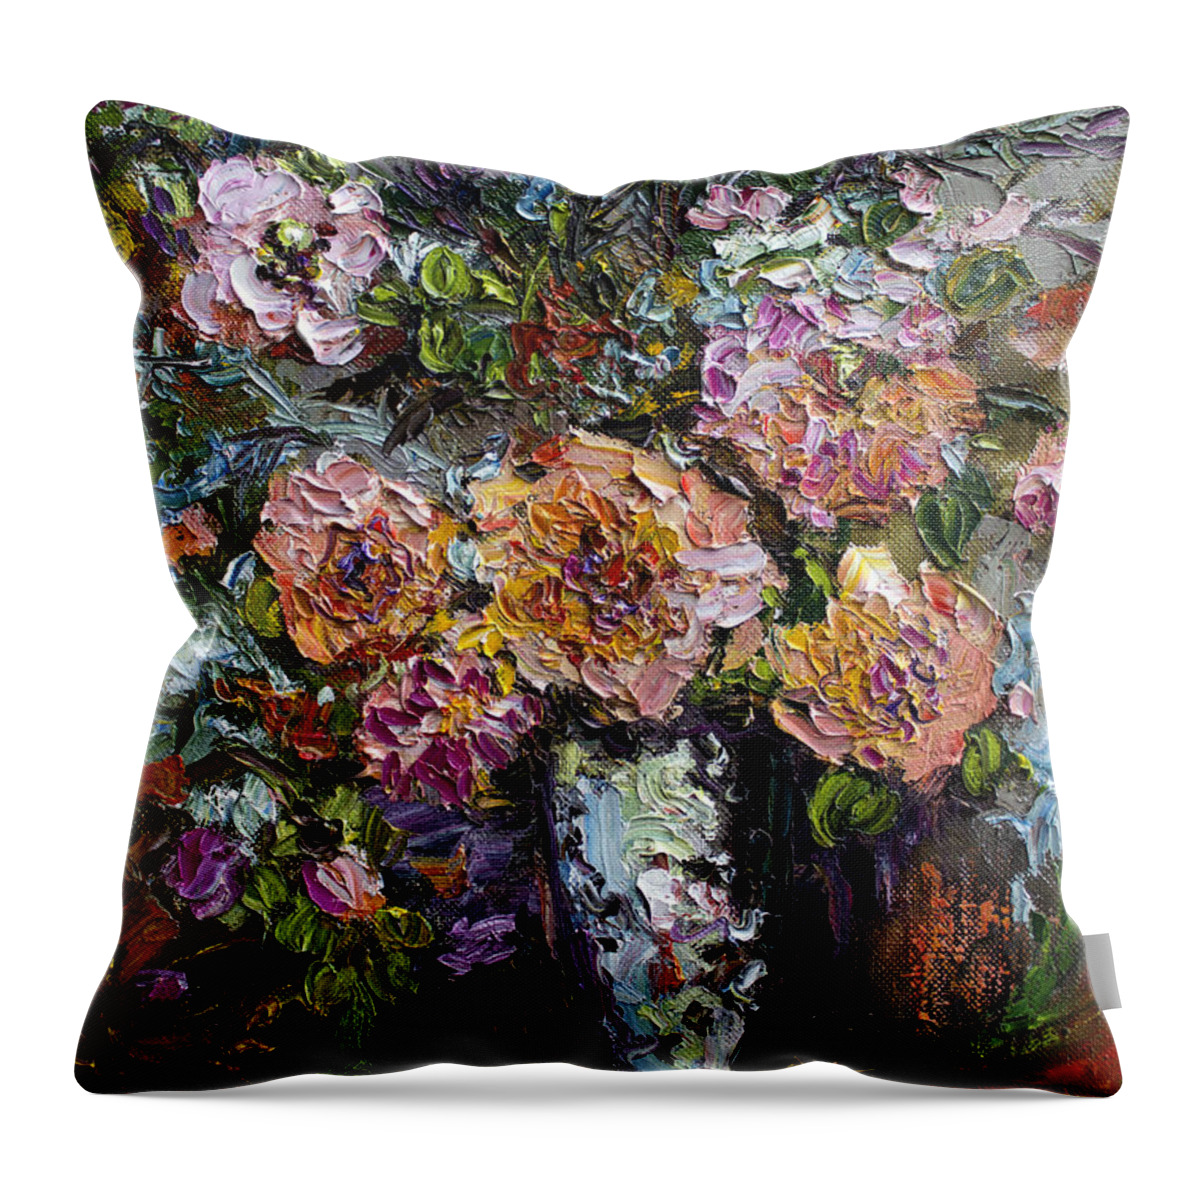 Impressionist Oil Painting Throw Pillow featuring the painting The Impressionists Heirloom Roses Still Life by Ginette Callaway